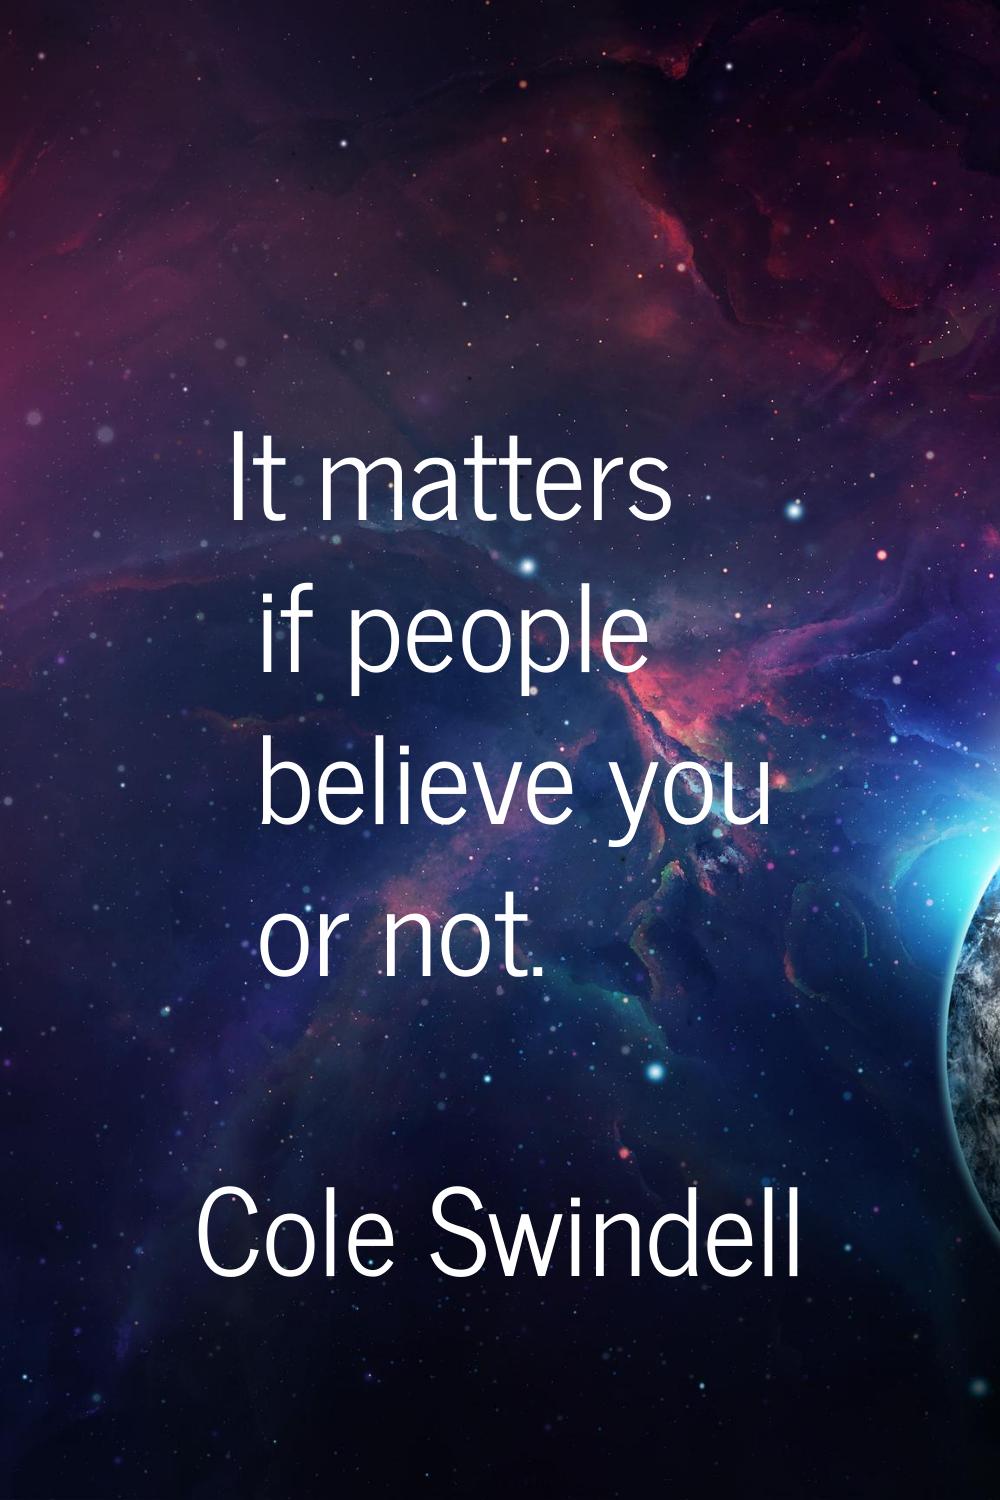 It matters if people believe you or not.